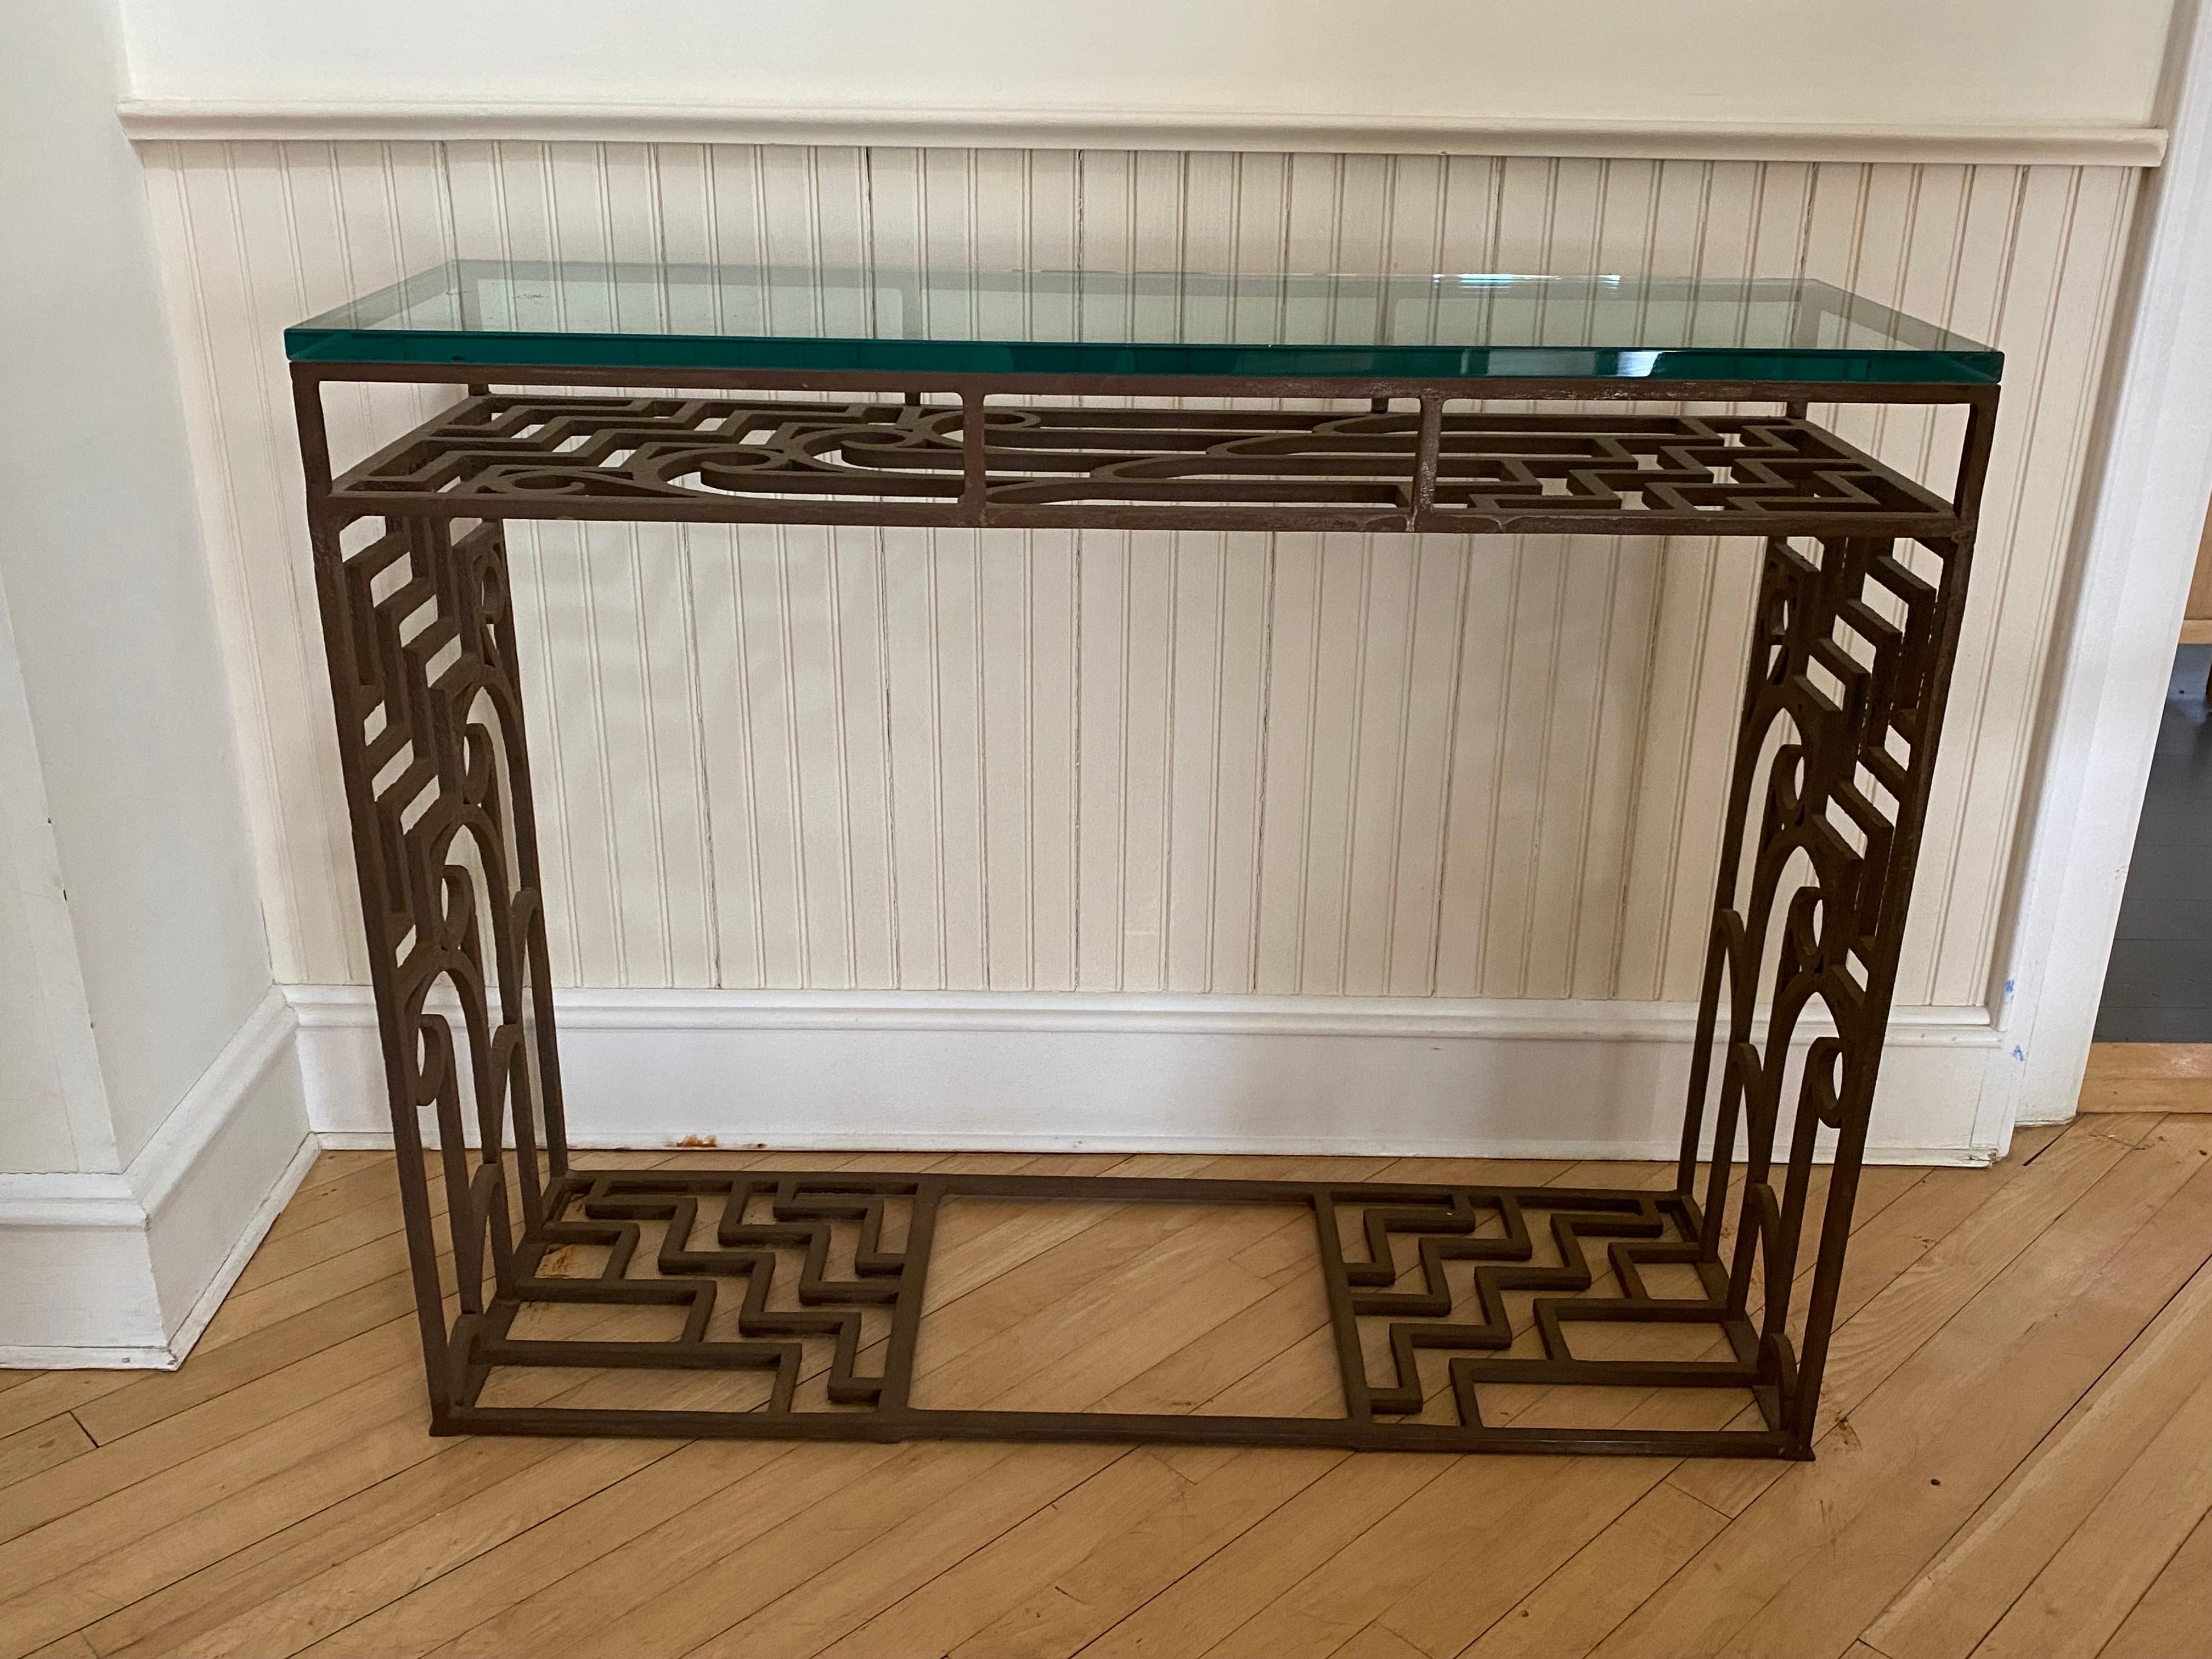 Art Deco style iron & glass console table, 20th century.
Iron base with wonderful Art Deco pattern. A shelf just below the glass. Thick 5/8